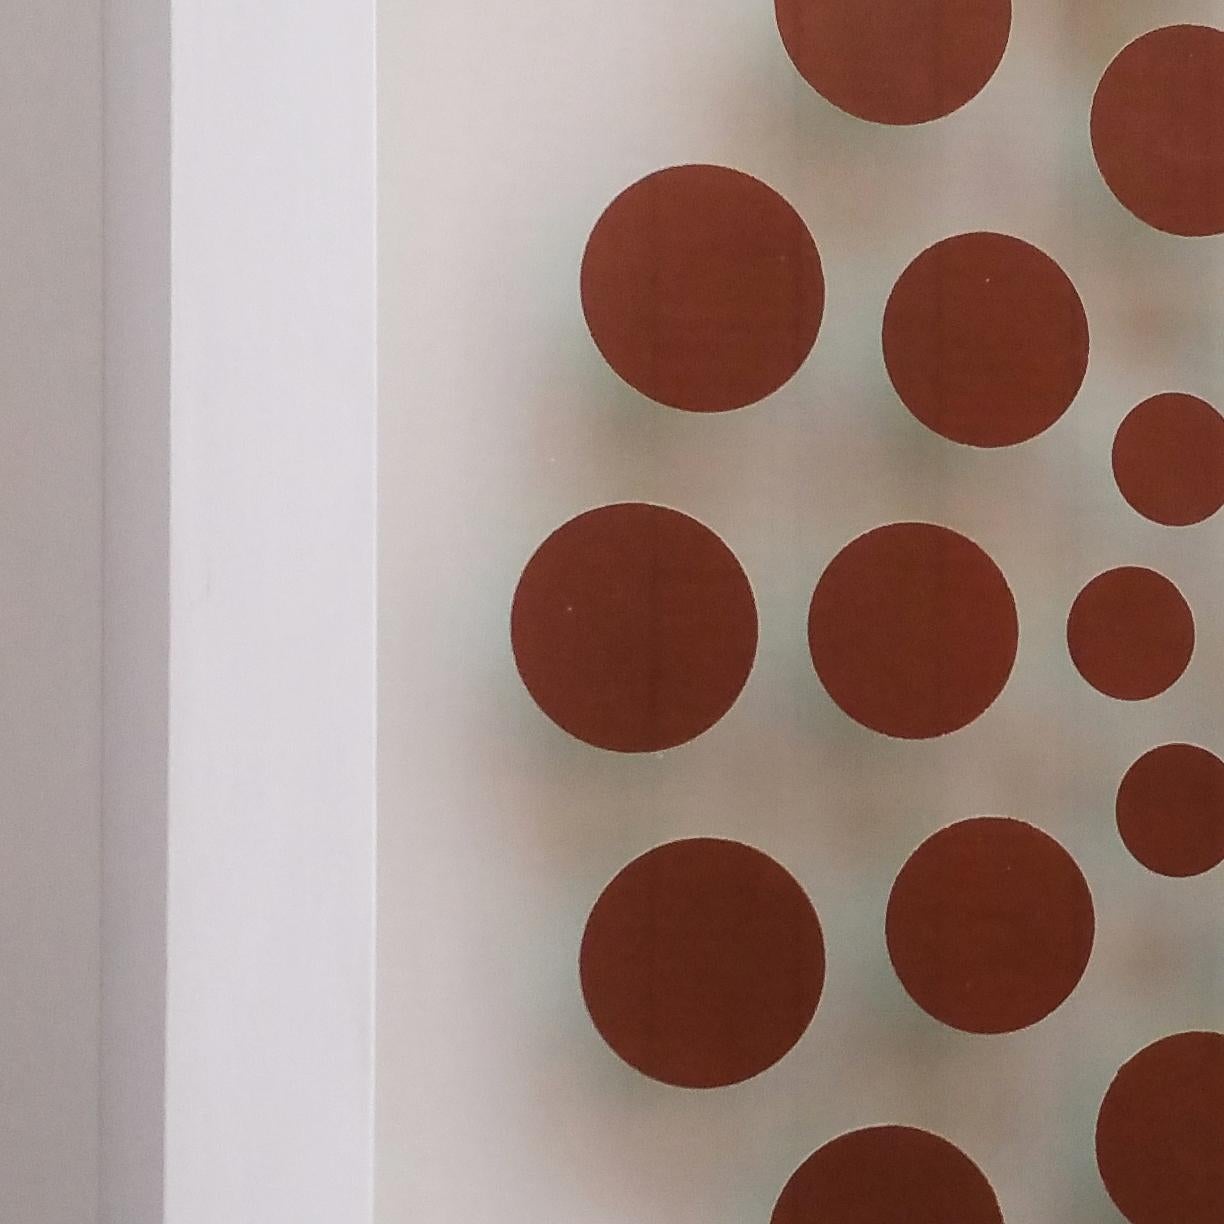 47 Dots V is a unique small size contemporary modern paper relief by renowned Polish-Dutch artist Eliza Kopec. This relief is a typical example of her preferred minimalist abstract geometric vocabulary. Carefully cut round paper elements (coloured